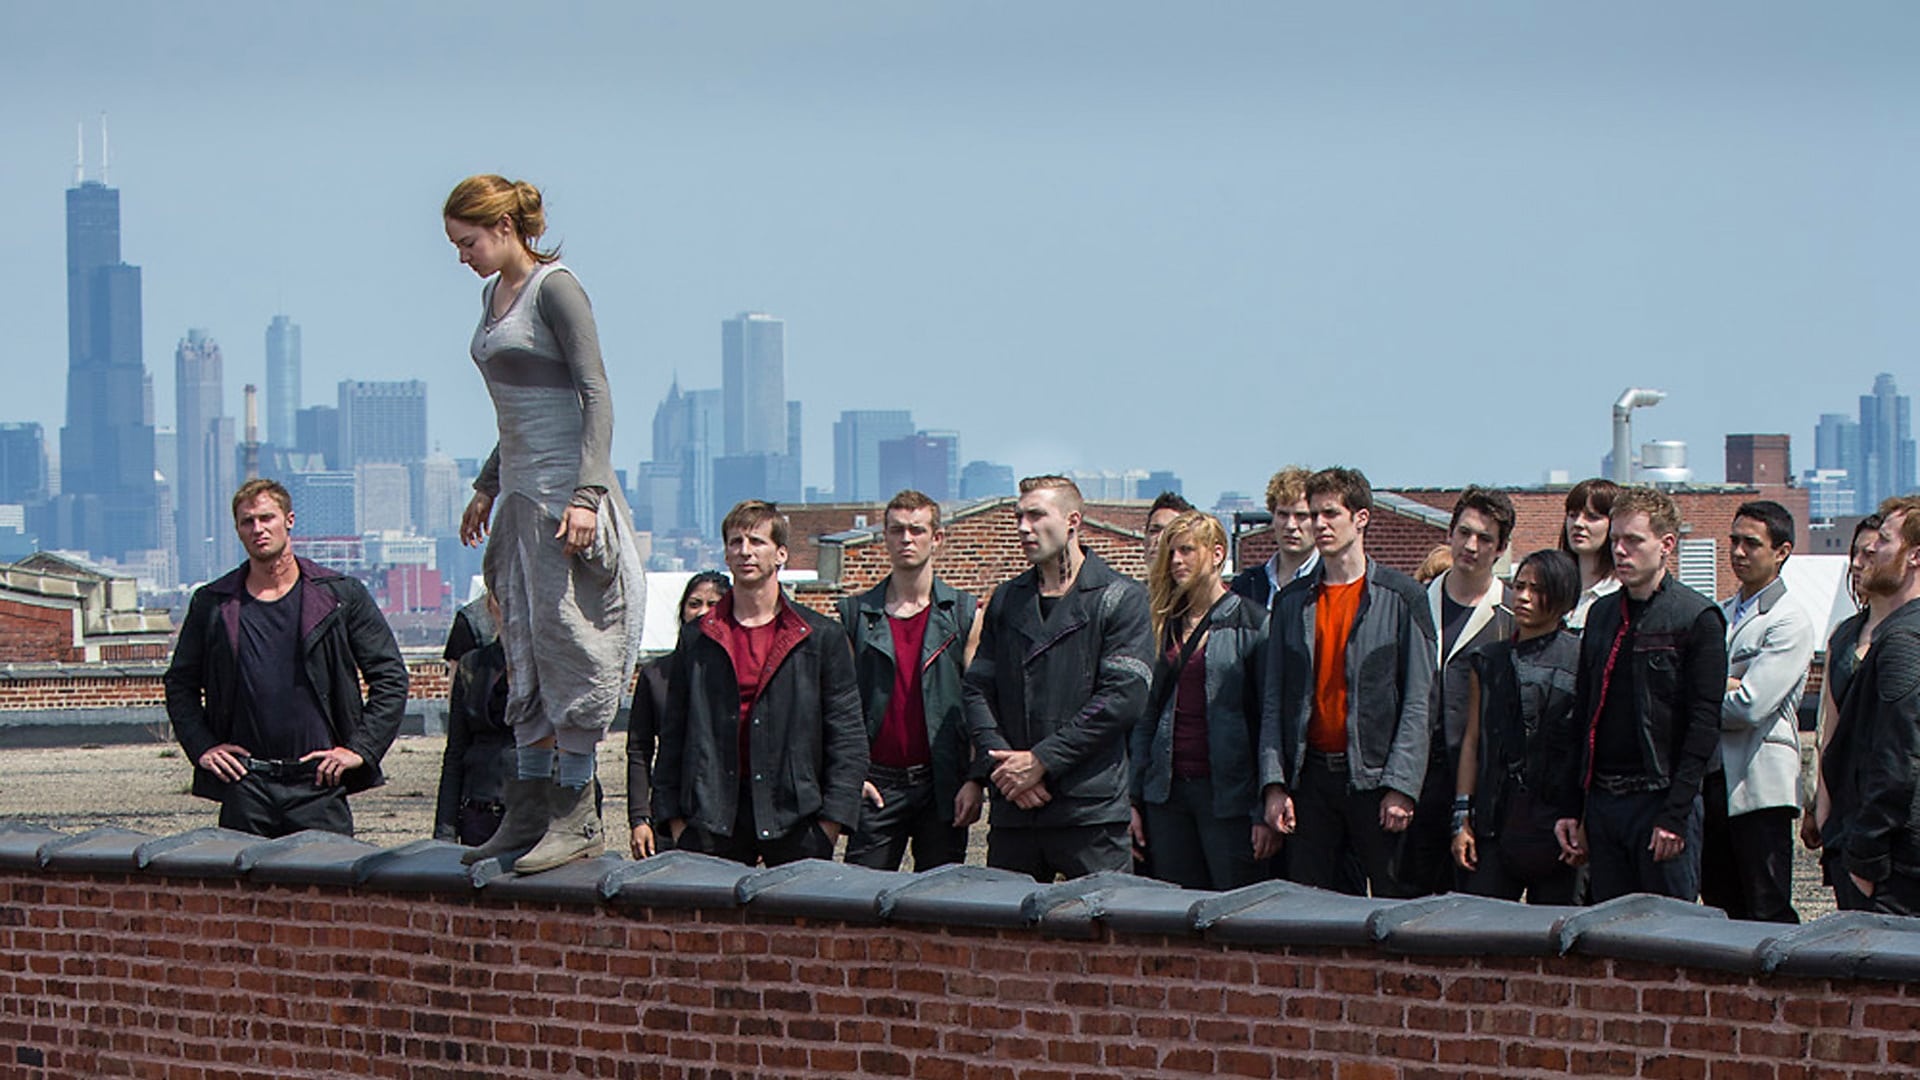 Divergent movie, Pictures, Entertainment weekly, 1920x1080 Full HD Desktop